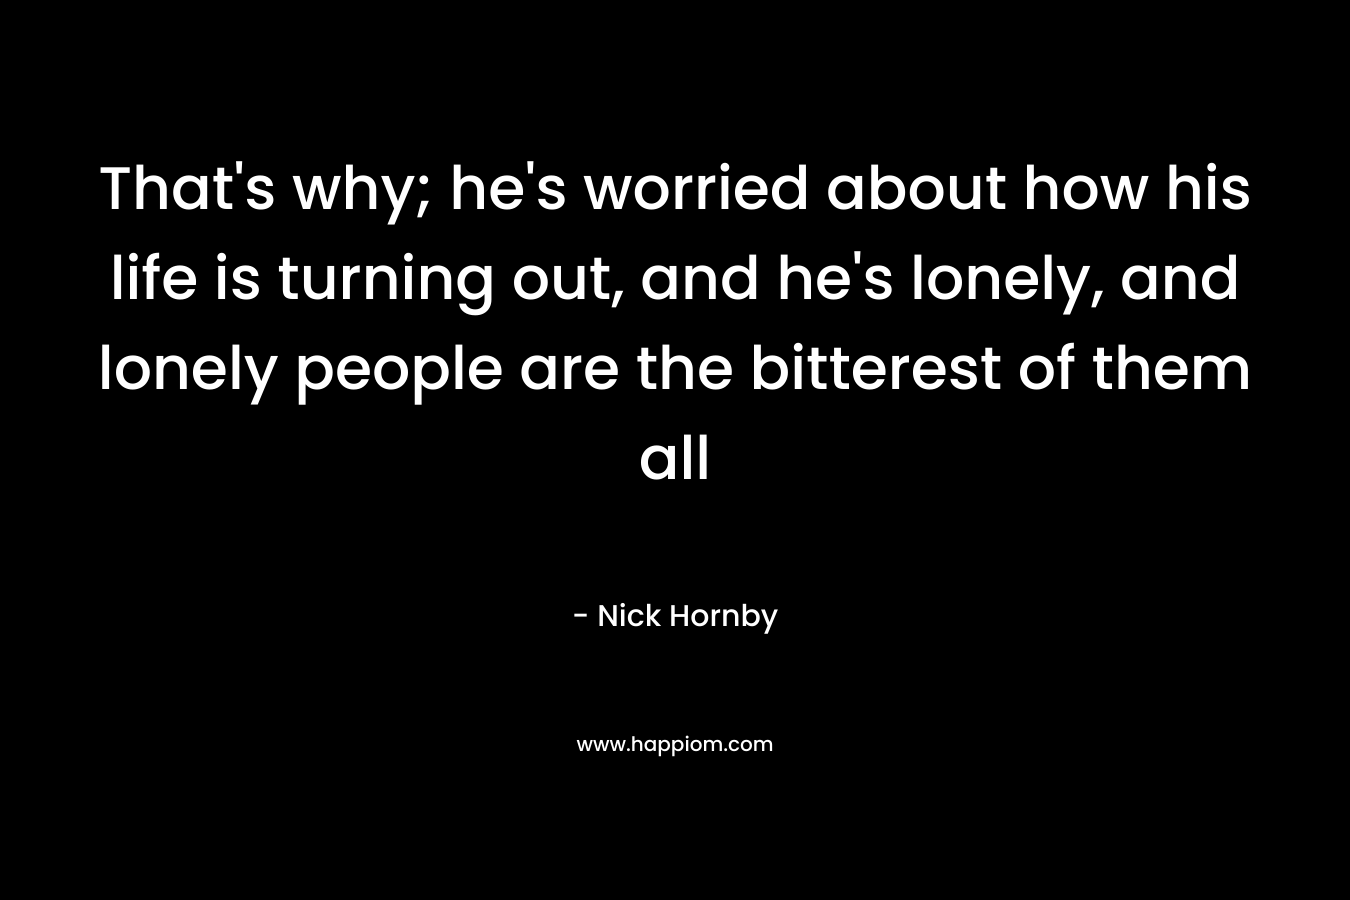 That’s why; he’s worried about how his life is turning out, and he’s lonely, and lonely people are the bitterest of them all – Nick Hornby